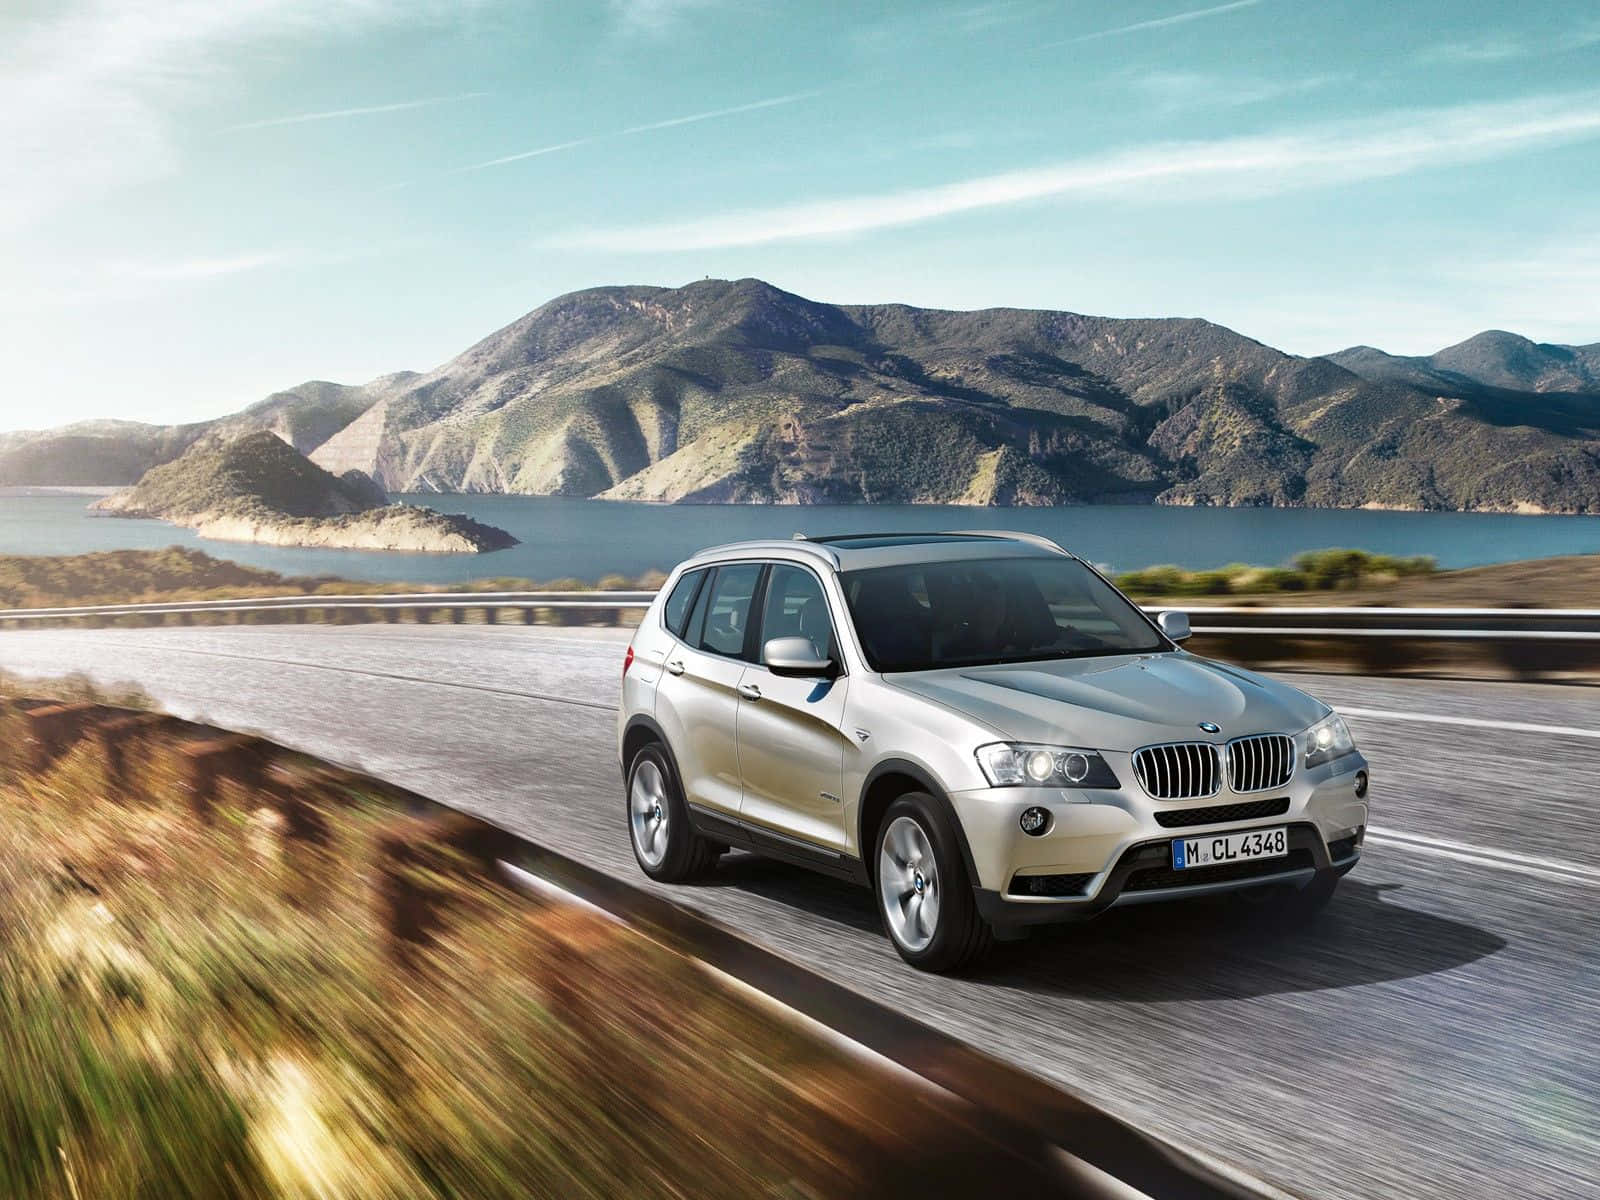 Caption: Powerful BMW X3 in Action Wallpaper